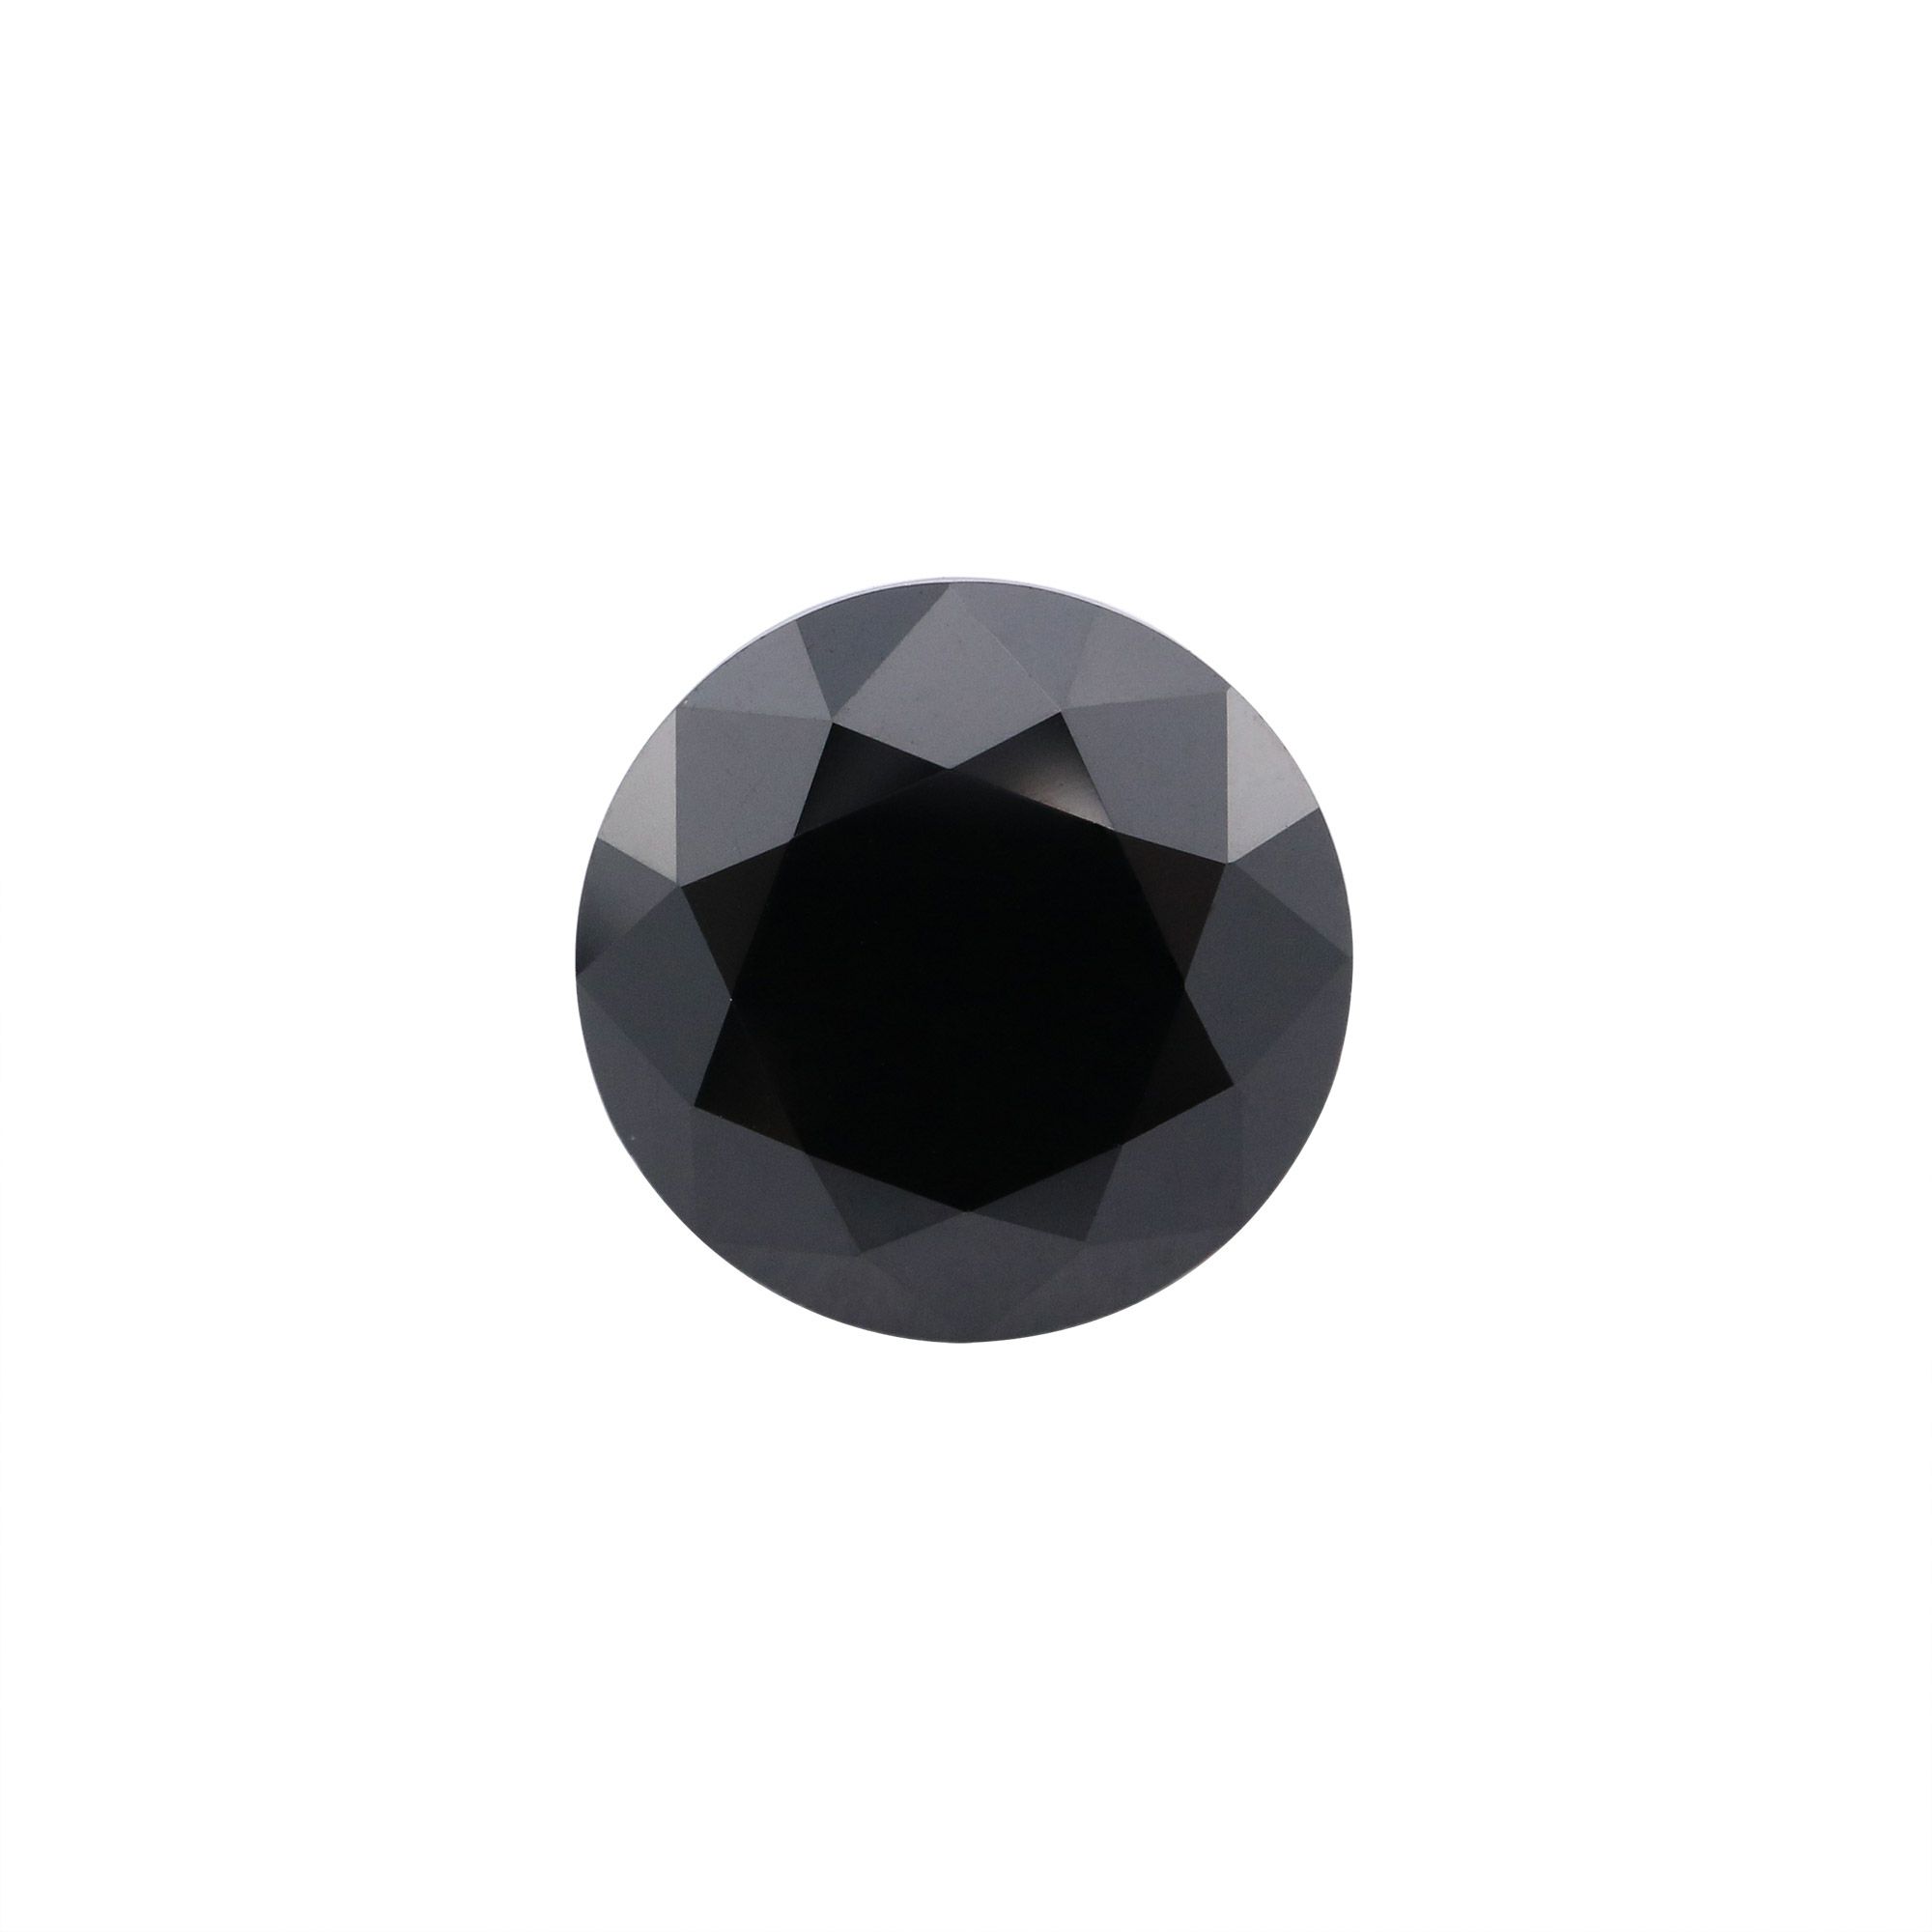 5Pcs 1-9MM Round Black Spinel Faceted Cut Loose Gemstone Natural Semi Precious Stone DIY Jewelry Supplies 4110164 - Click Image to Close